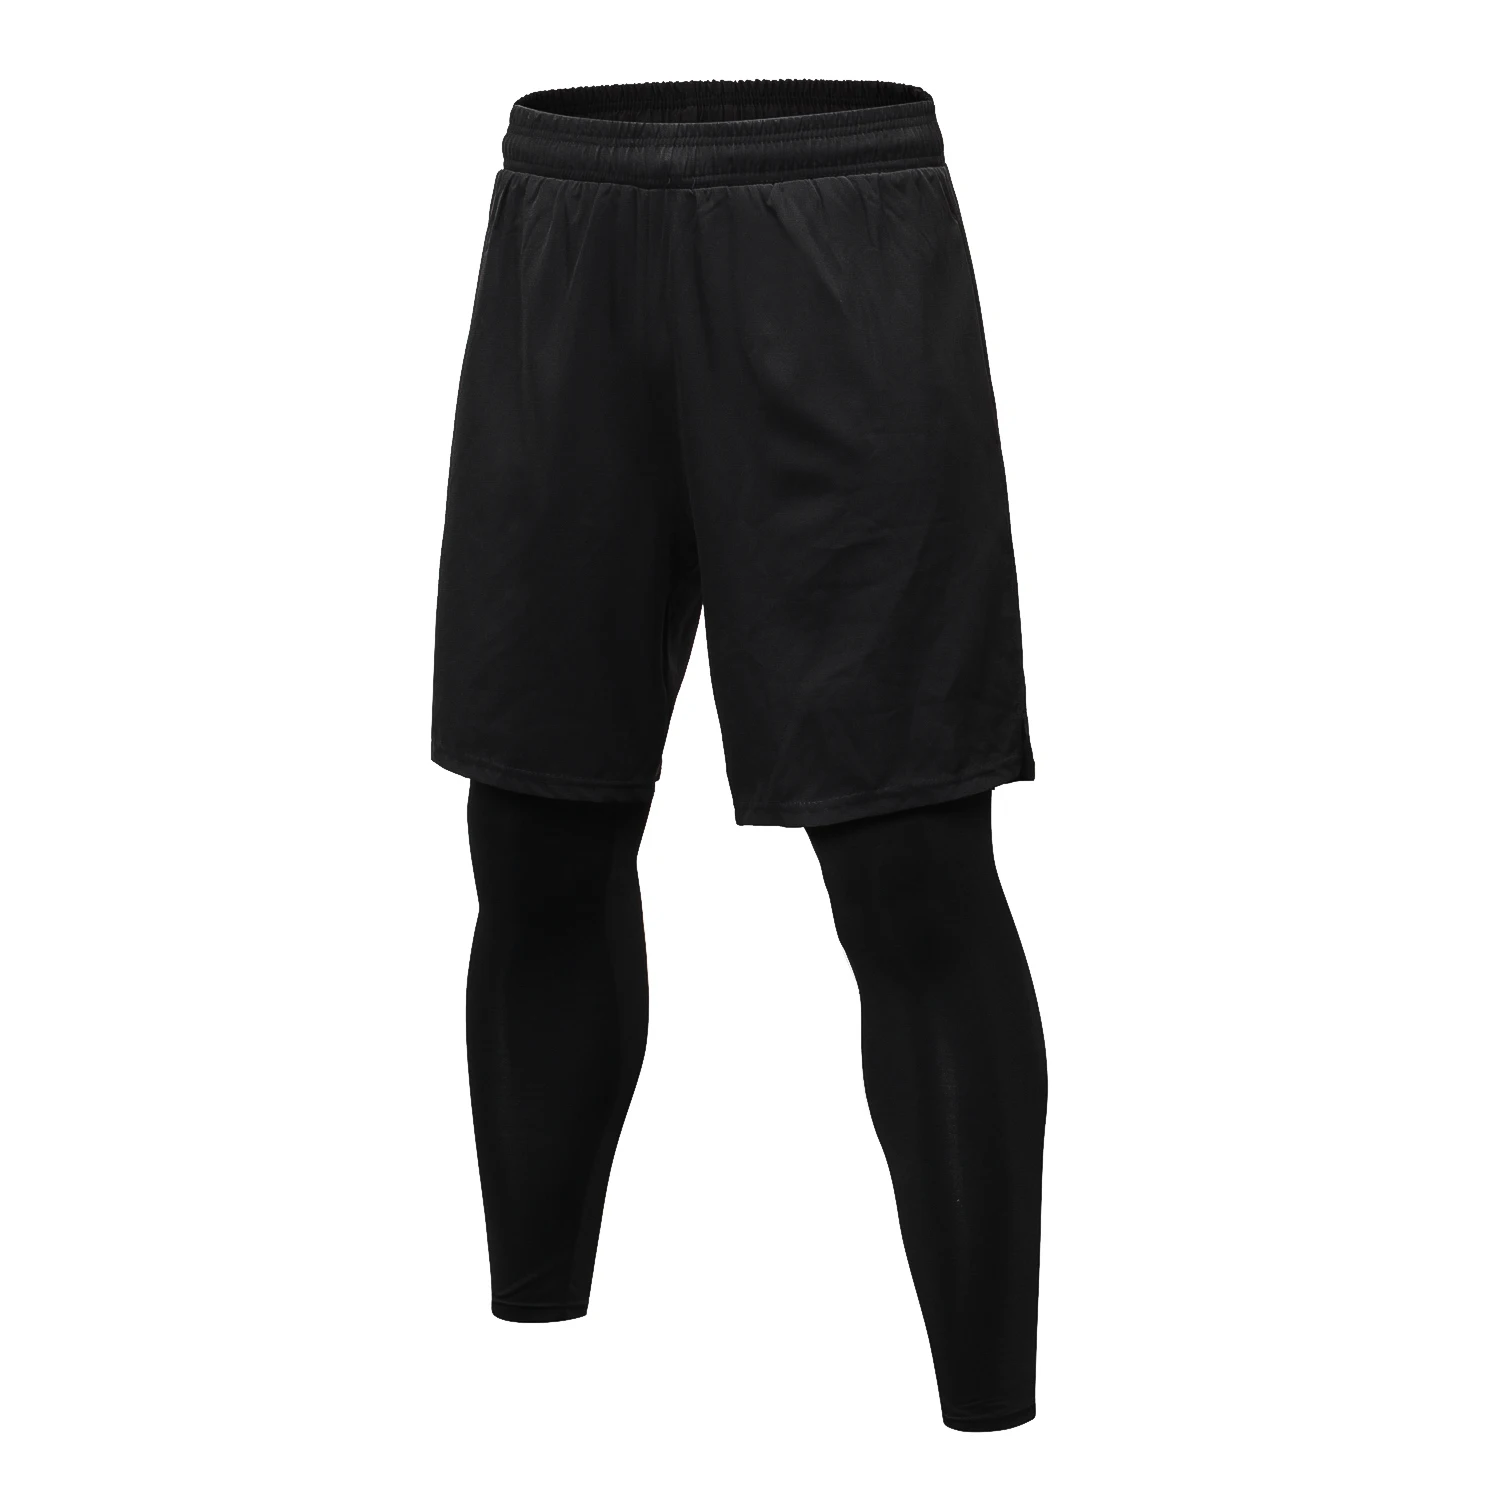 Wholesale Mens 2 in 1 Compression Pants Running Tights Athletic